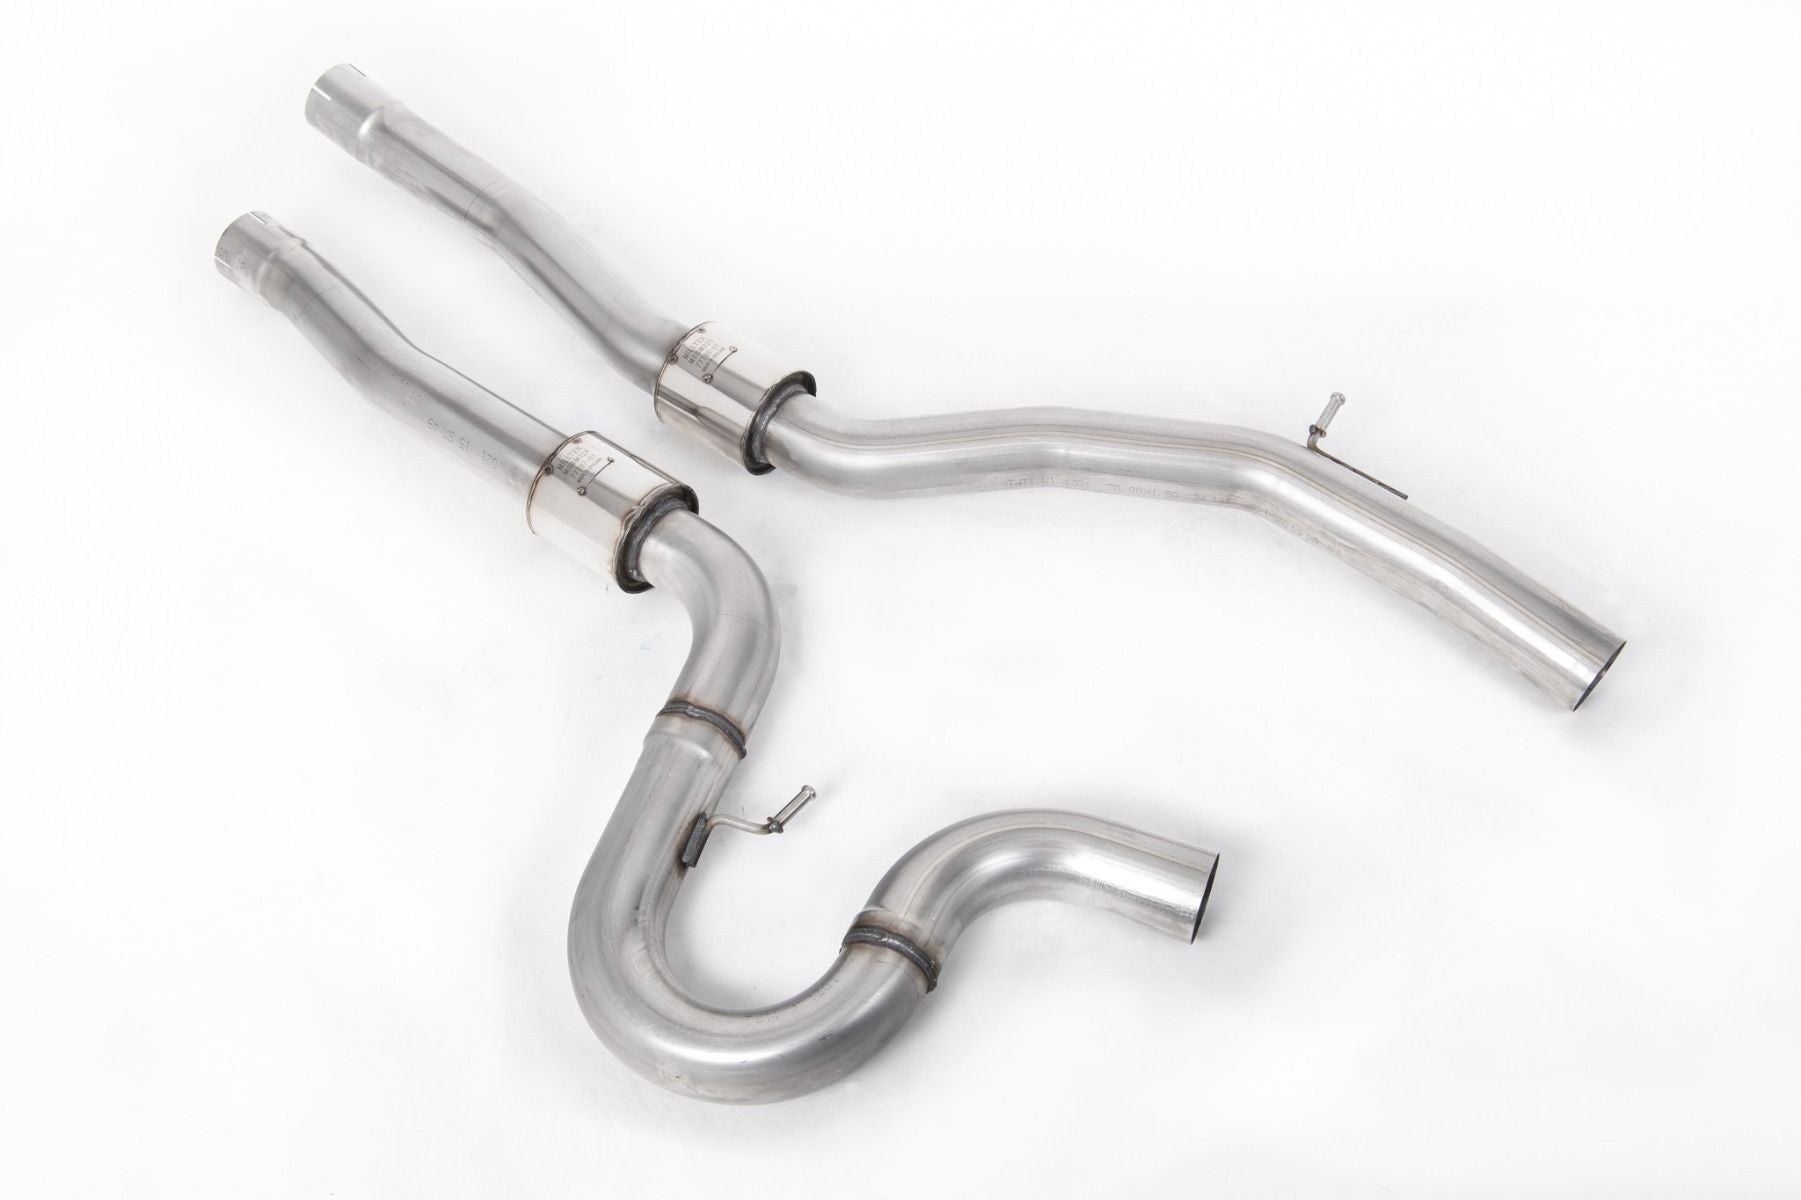 Milltek Exhaust Upgrade Kit - F80 M3/M3 Competition Saloon (Non-OPF/GPF Models only) (For Milltek Cat-Back Only)